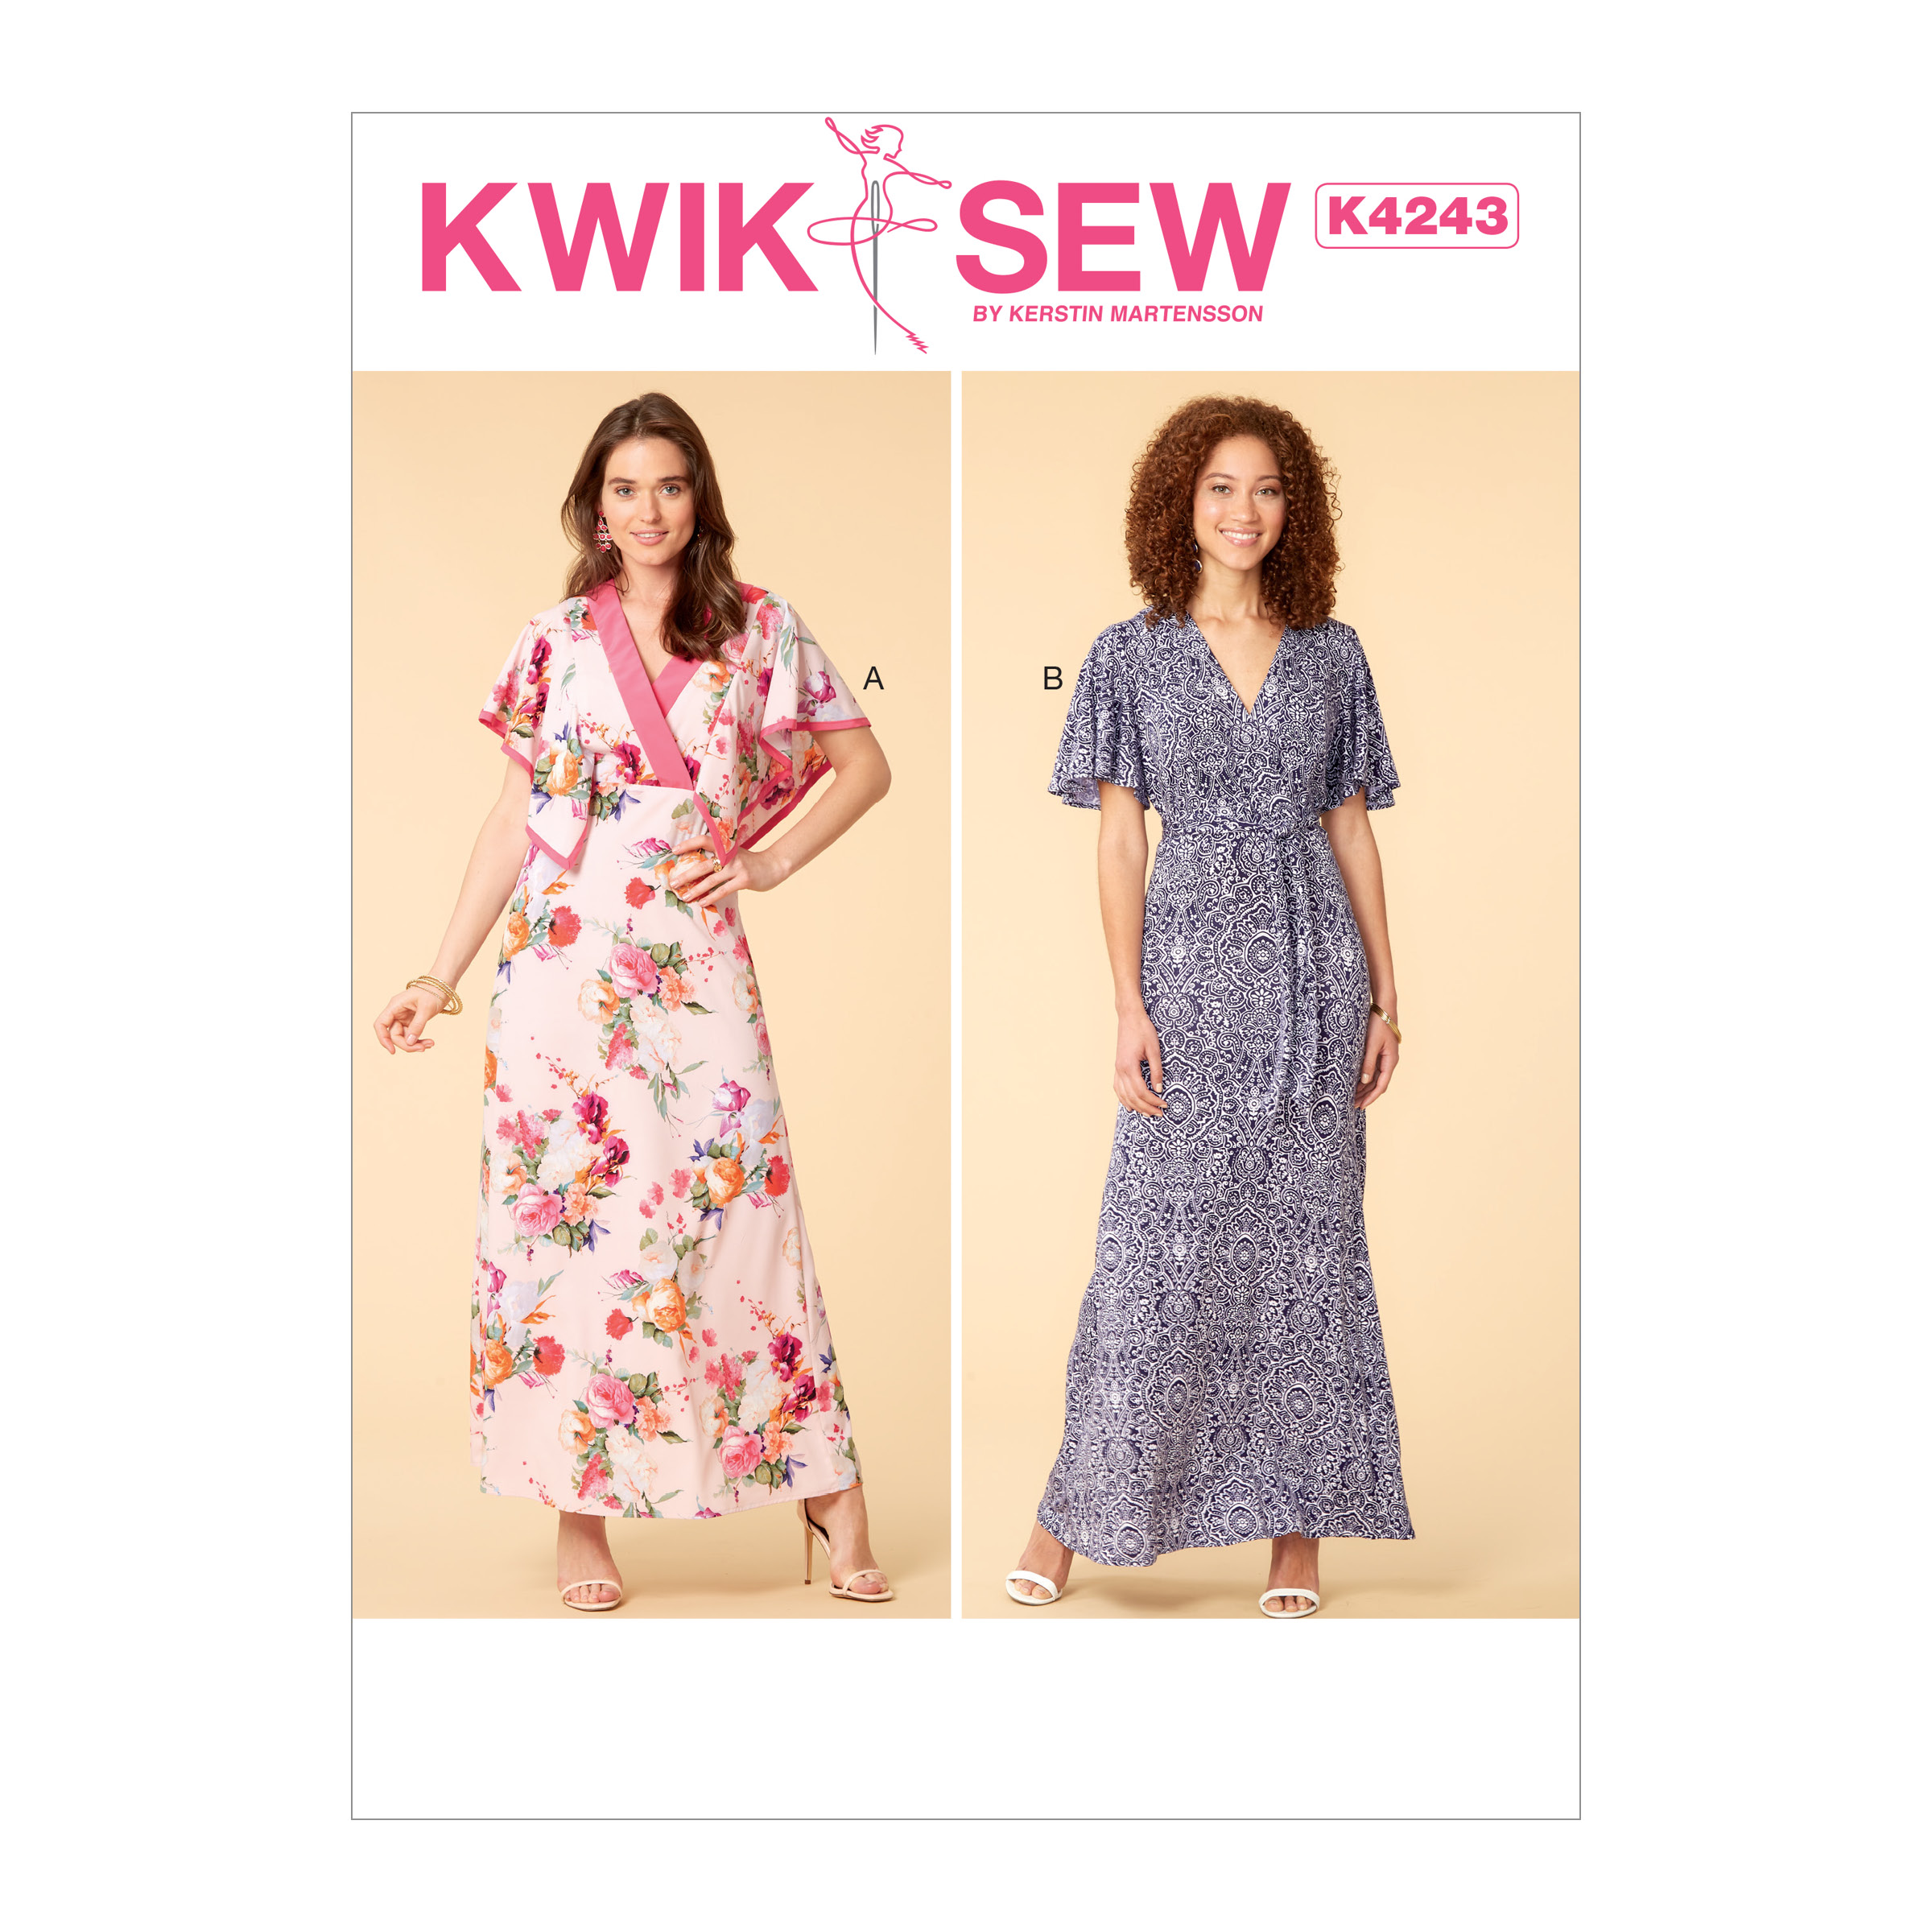 Kwik Sew - 3634 - The Sewing Place